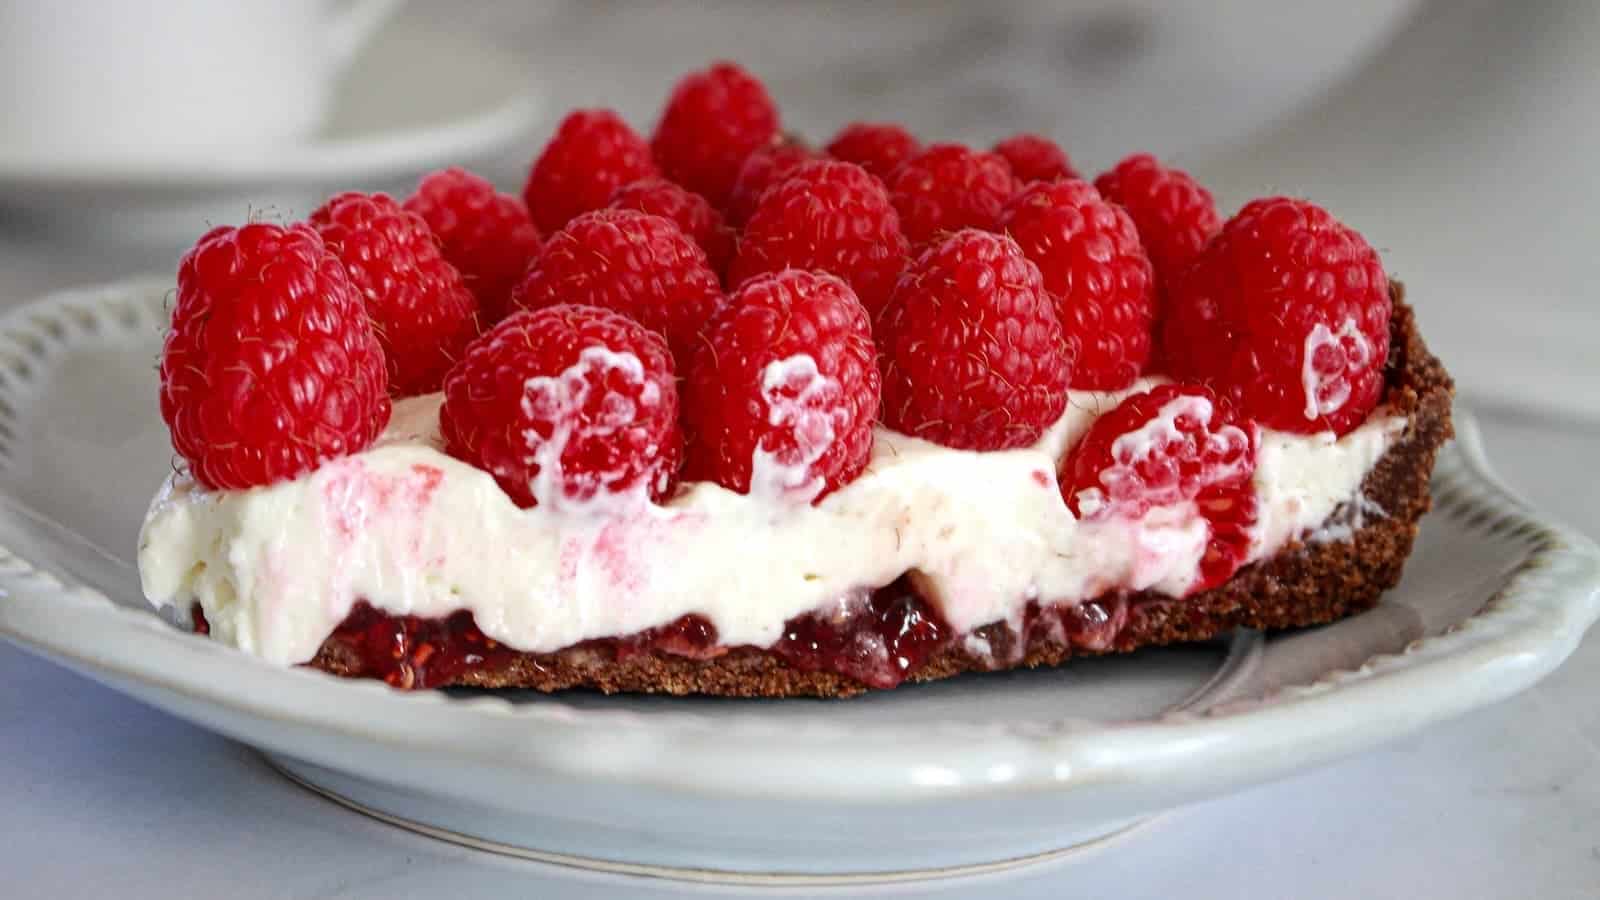 A slice of tart topped with a layer of jam, cream, and whole raspberries on a ceramic plate.